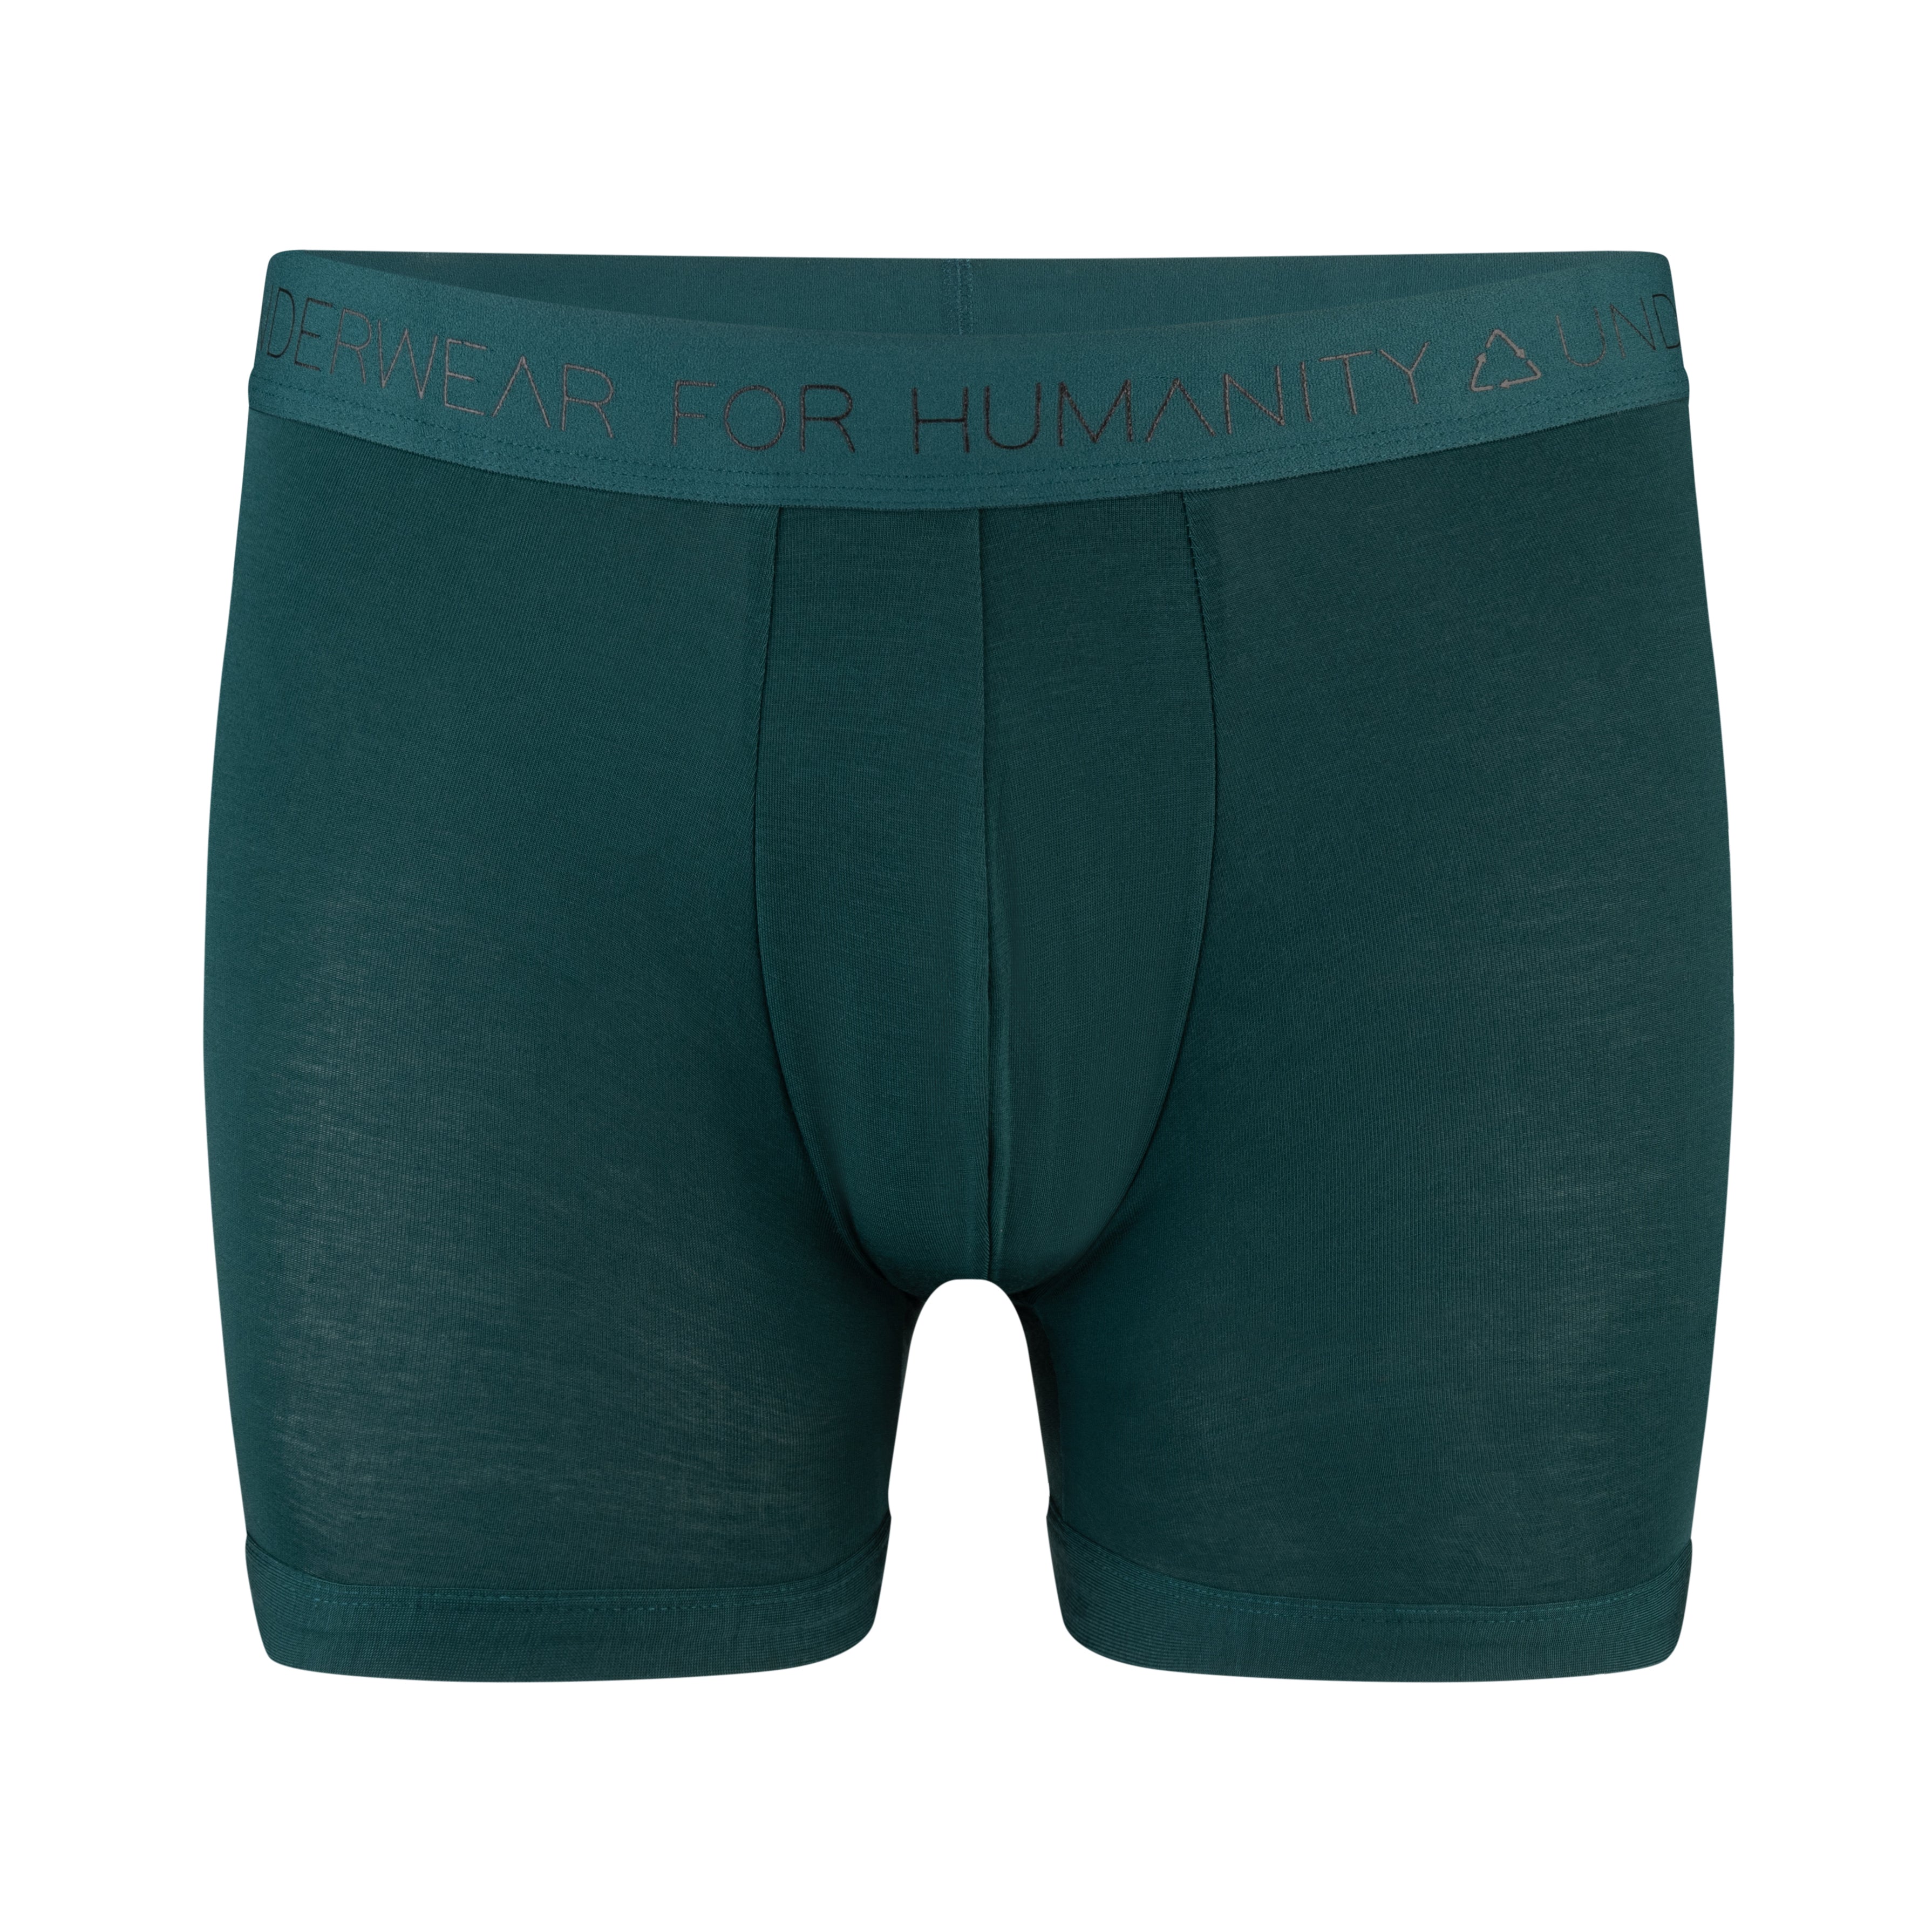 Sustainable, ethically made atlantis trunk style underwear. Long leg, wide thigh fit with elastic bind, no riding, cup support close to the body. made with tencel fabric and recycled elastic, thin, no dig waist band.front view of trunks